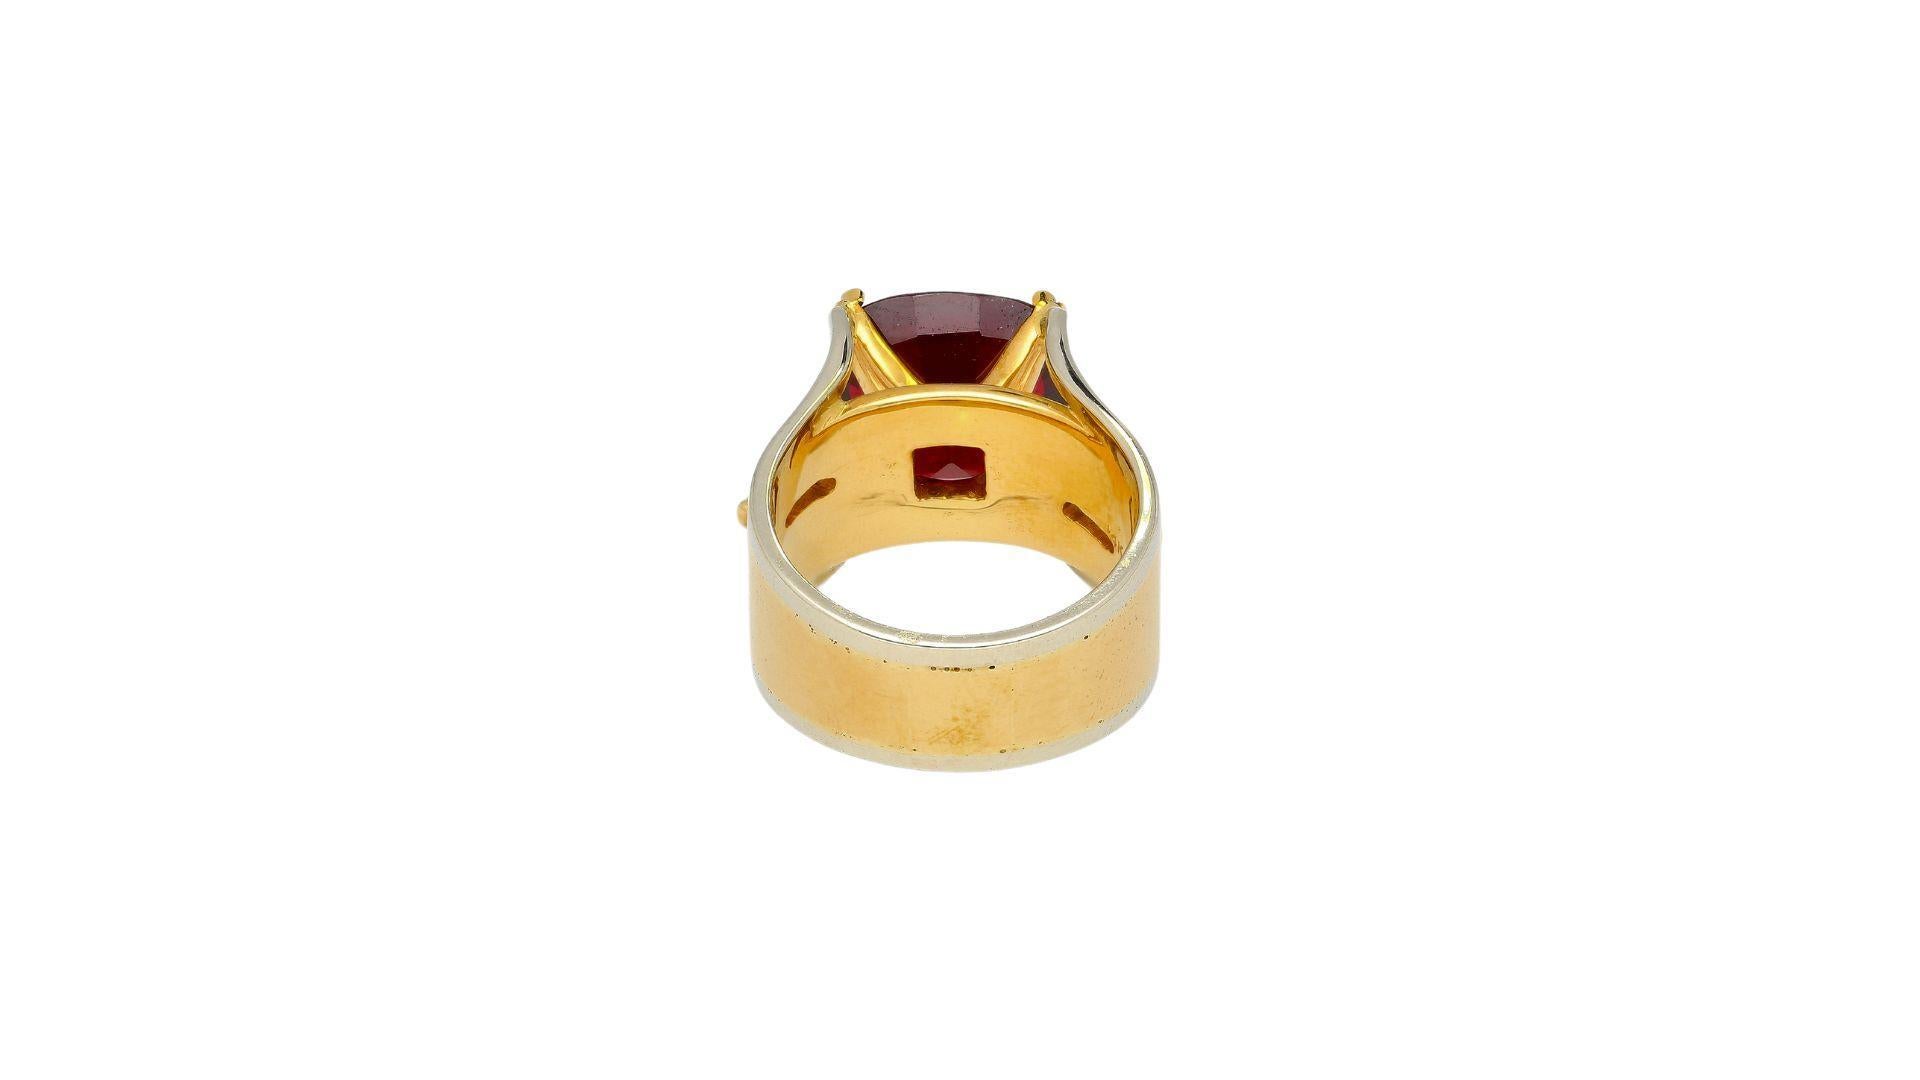 No Heat Burma Origin Spinel in Vintage 14K Gold Ring. 

This natural gemstone ring features a red spinel center stone. The spinel, has GIA certification, with no evidence of heat treatment and origins from Burma, Myanmar. It is paired with two